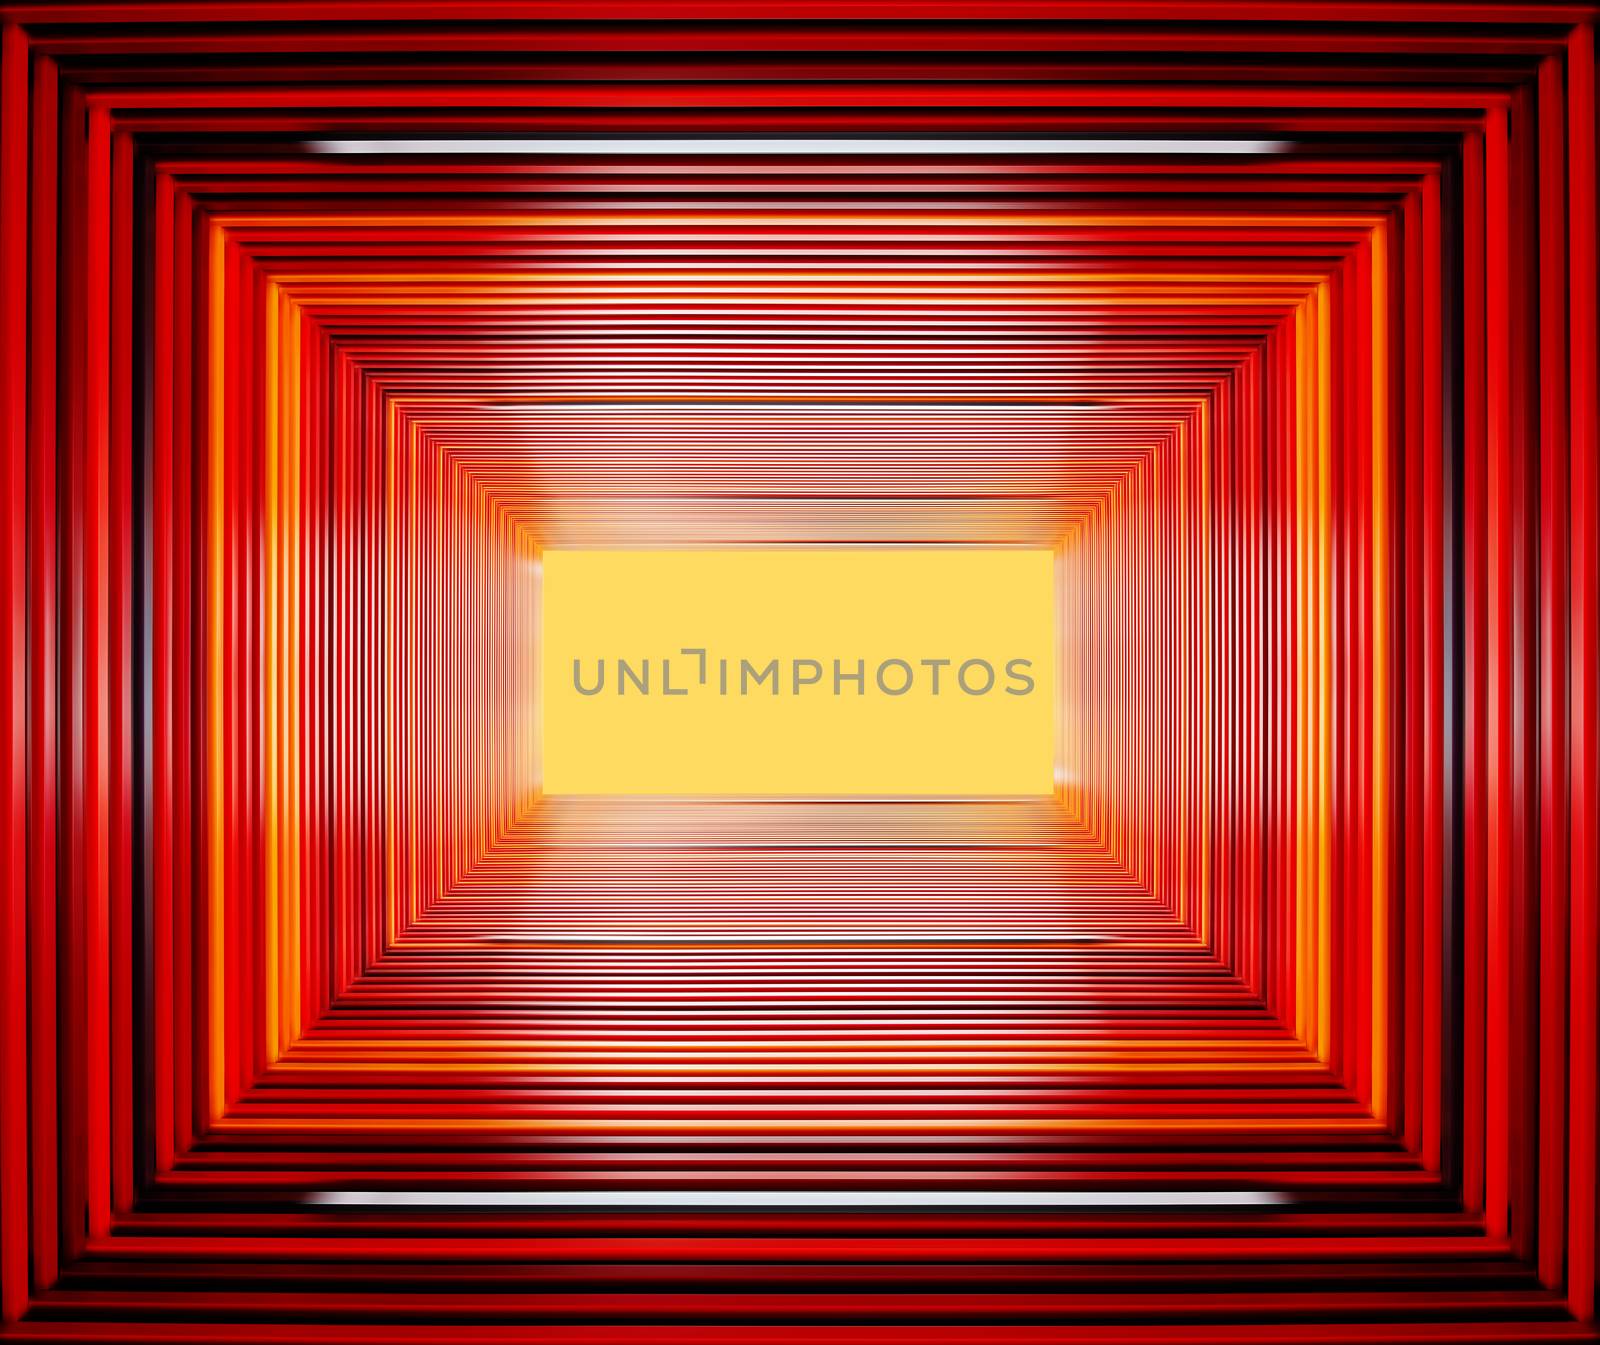 abstract background like technology templates texture